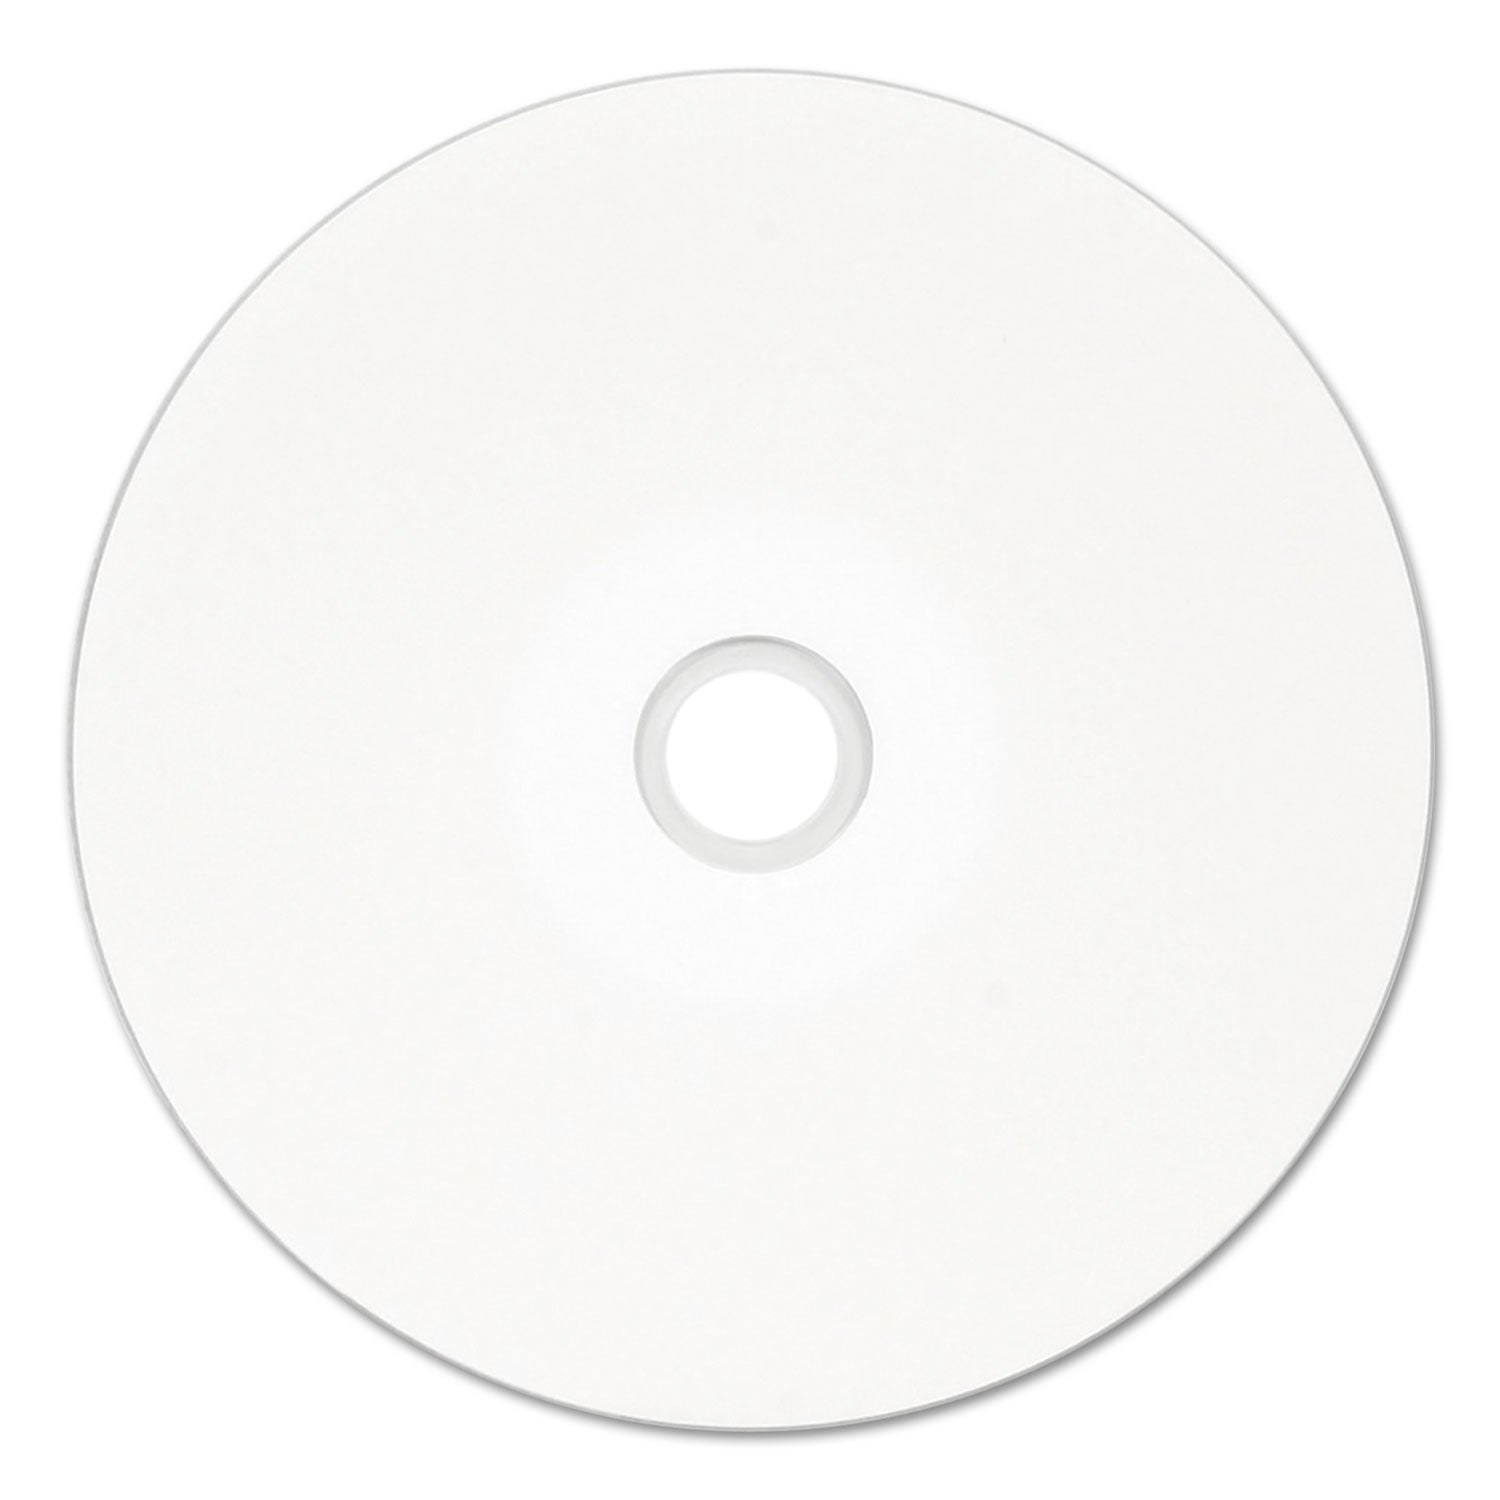 DVD-R DataLife Plus Printable Recordable Disc, 4.7 GB,16x, Spindle, White, 50/Pack - 